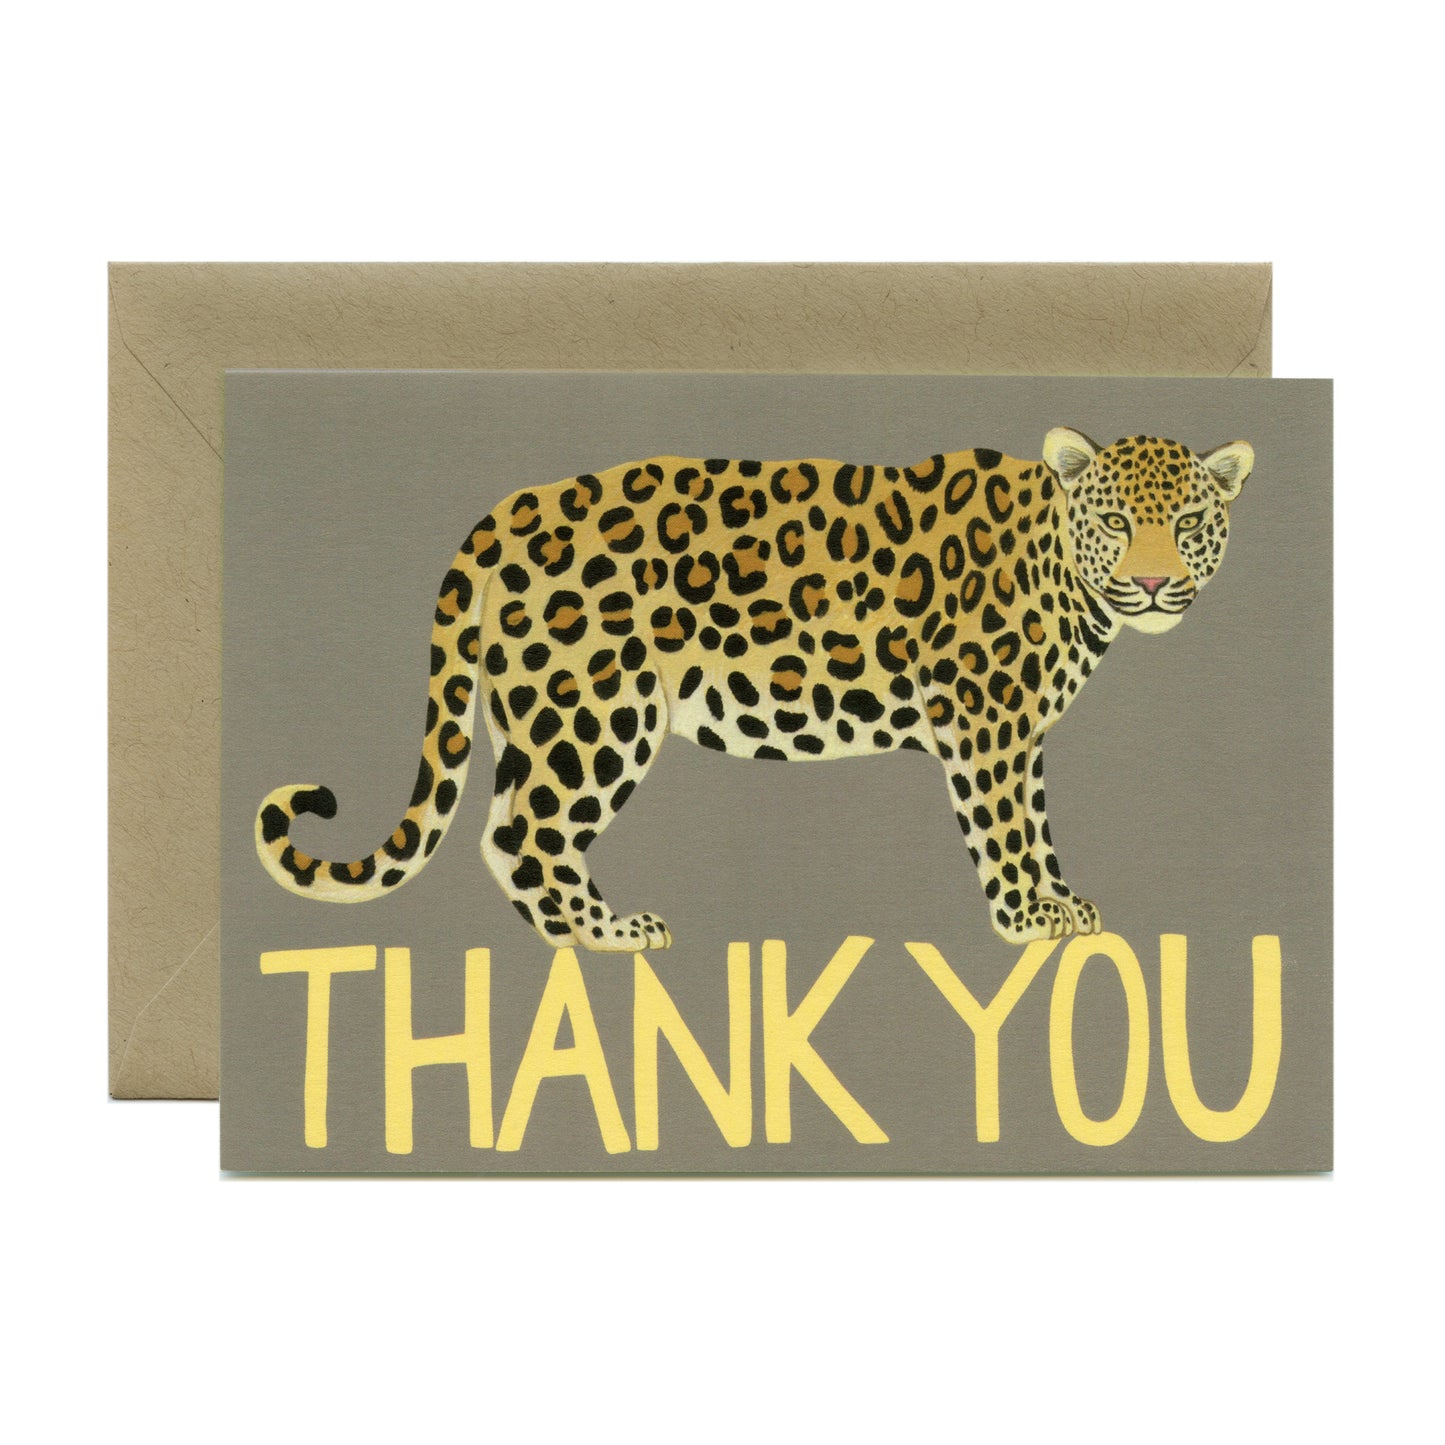 BIG CATS - THANK YOU GREETING CARDS, VARIETY BOXED SET OF 8